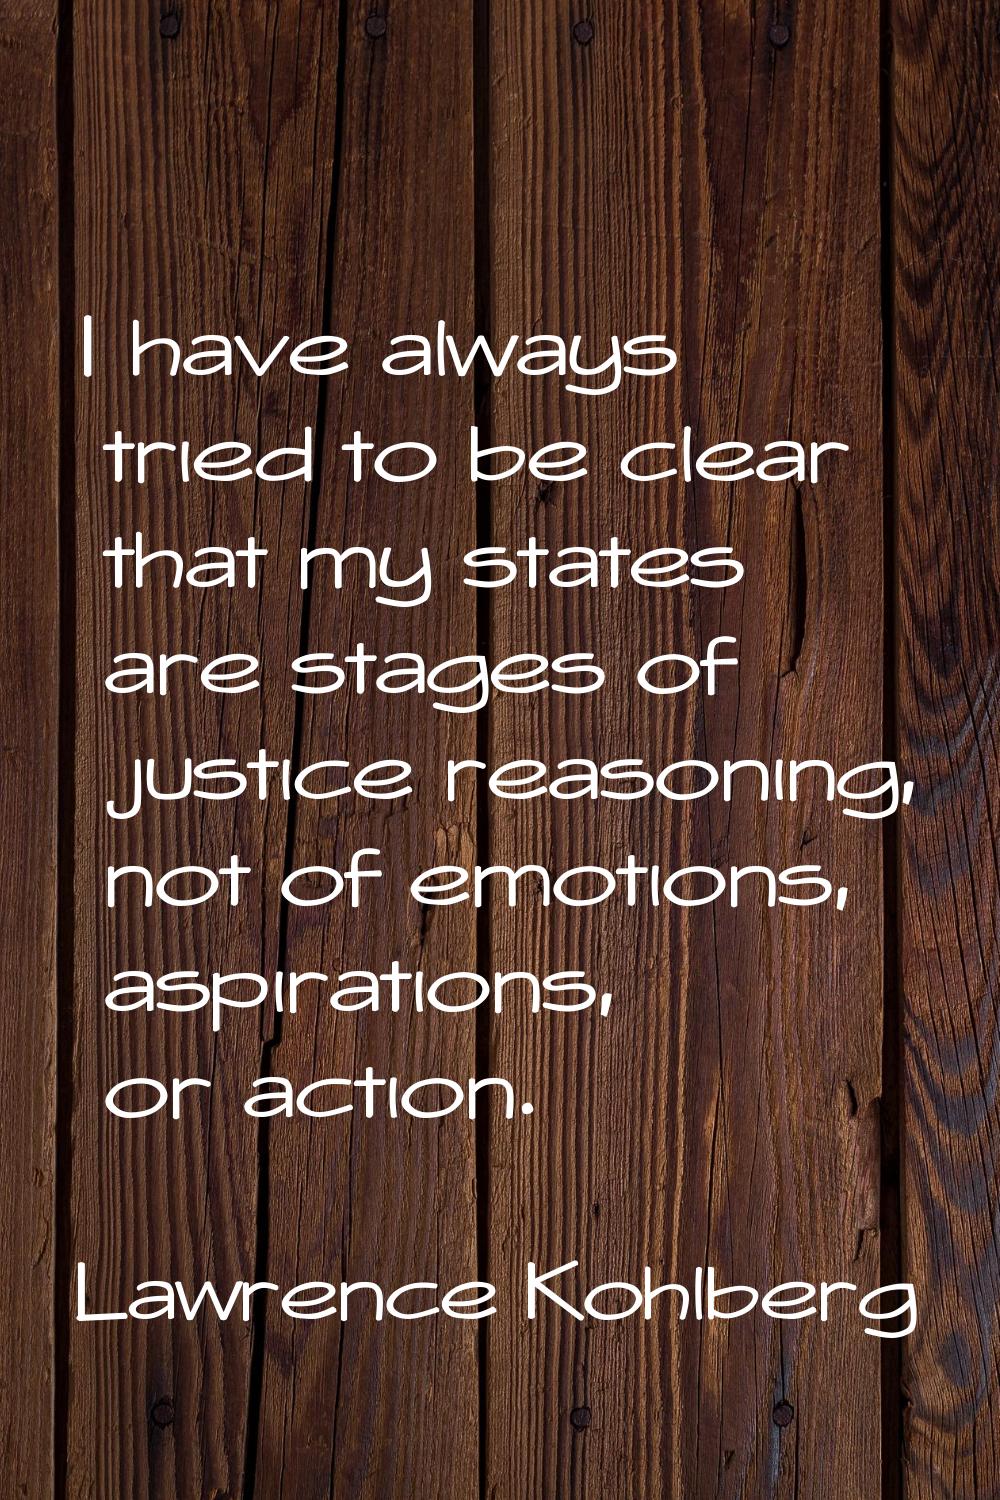 I have always tried to be clear that my states are stages of justice reasoning, not of emotions, as